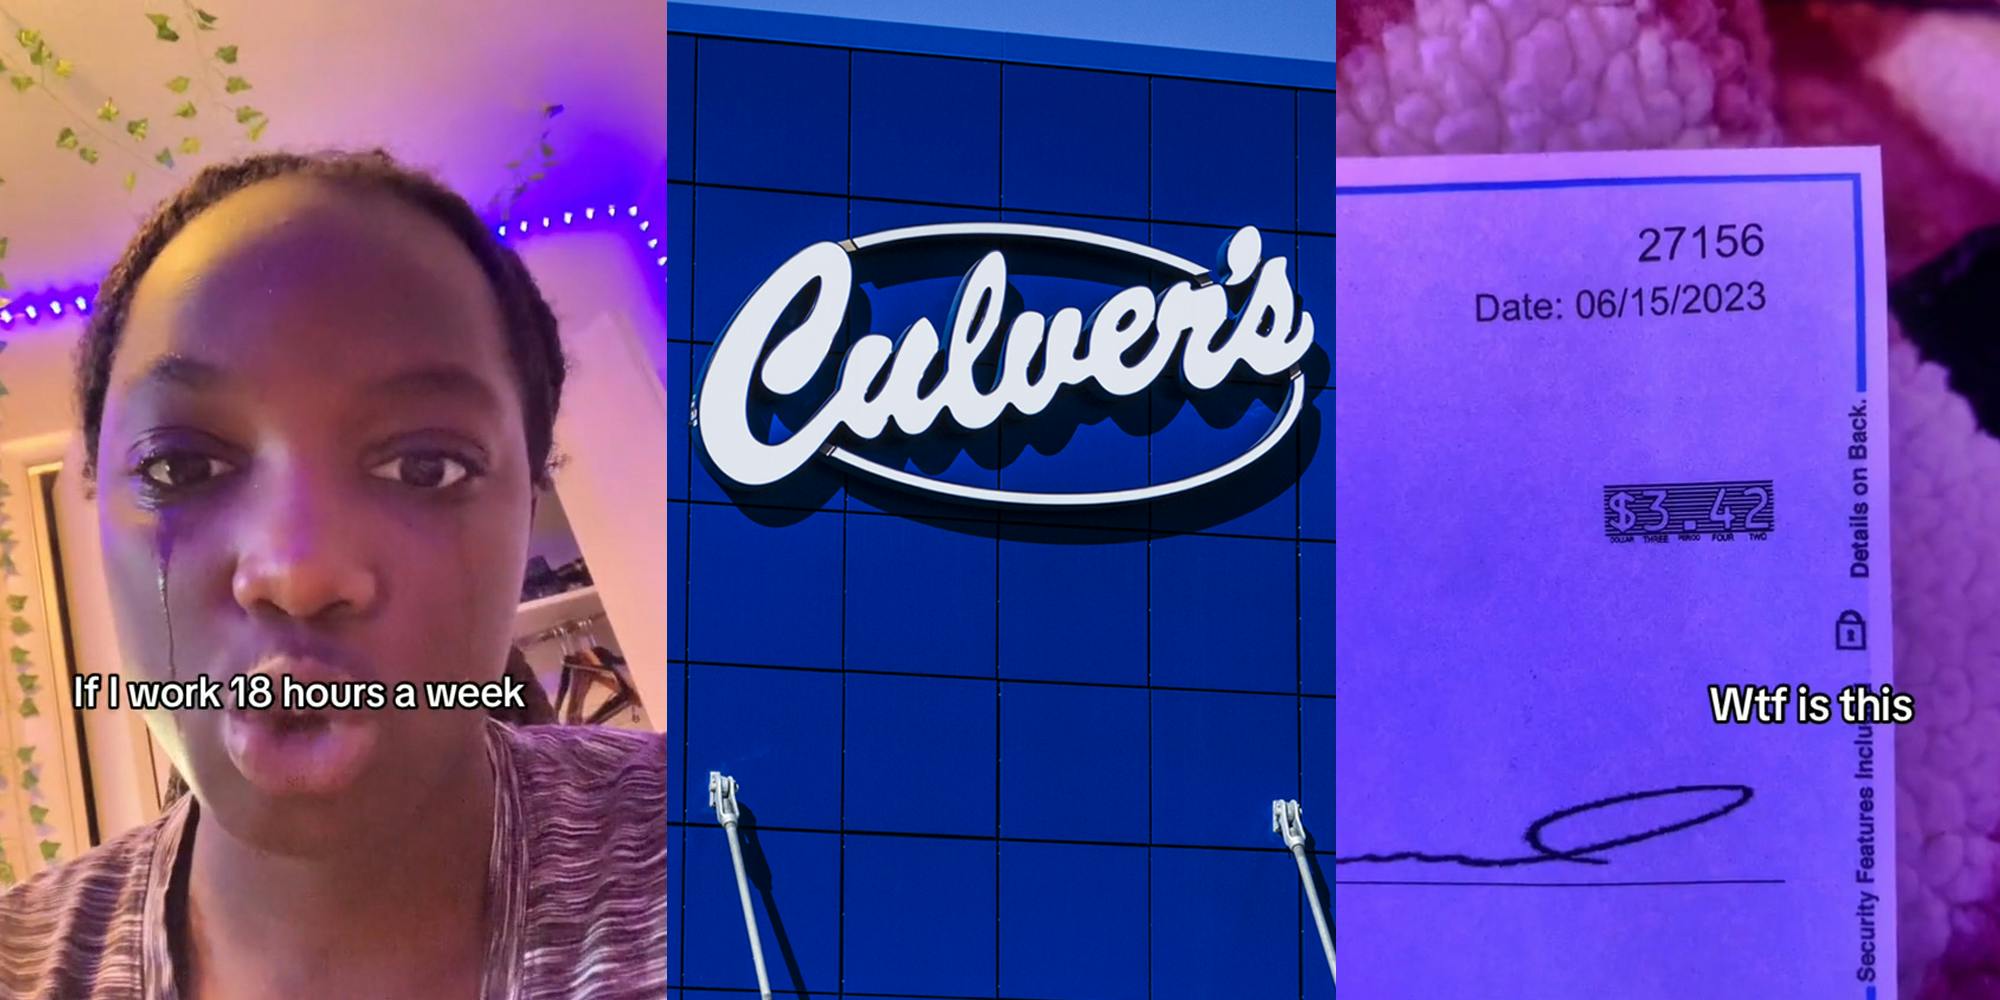 Culver's worker speaking with caption "If I work 18 hours a week" (l) Culver's building with sign (c) paycheck with total at $3.42 with caption "Wtf is this" (r)